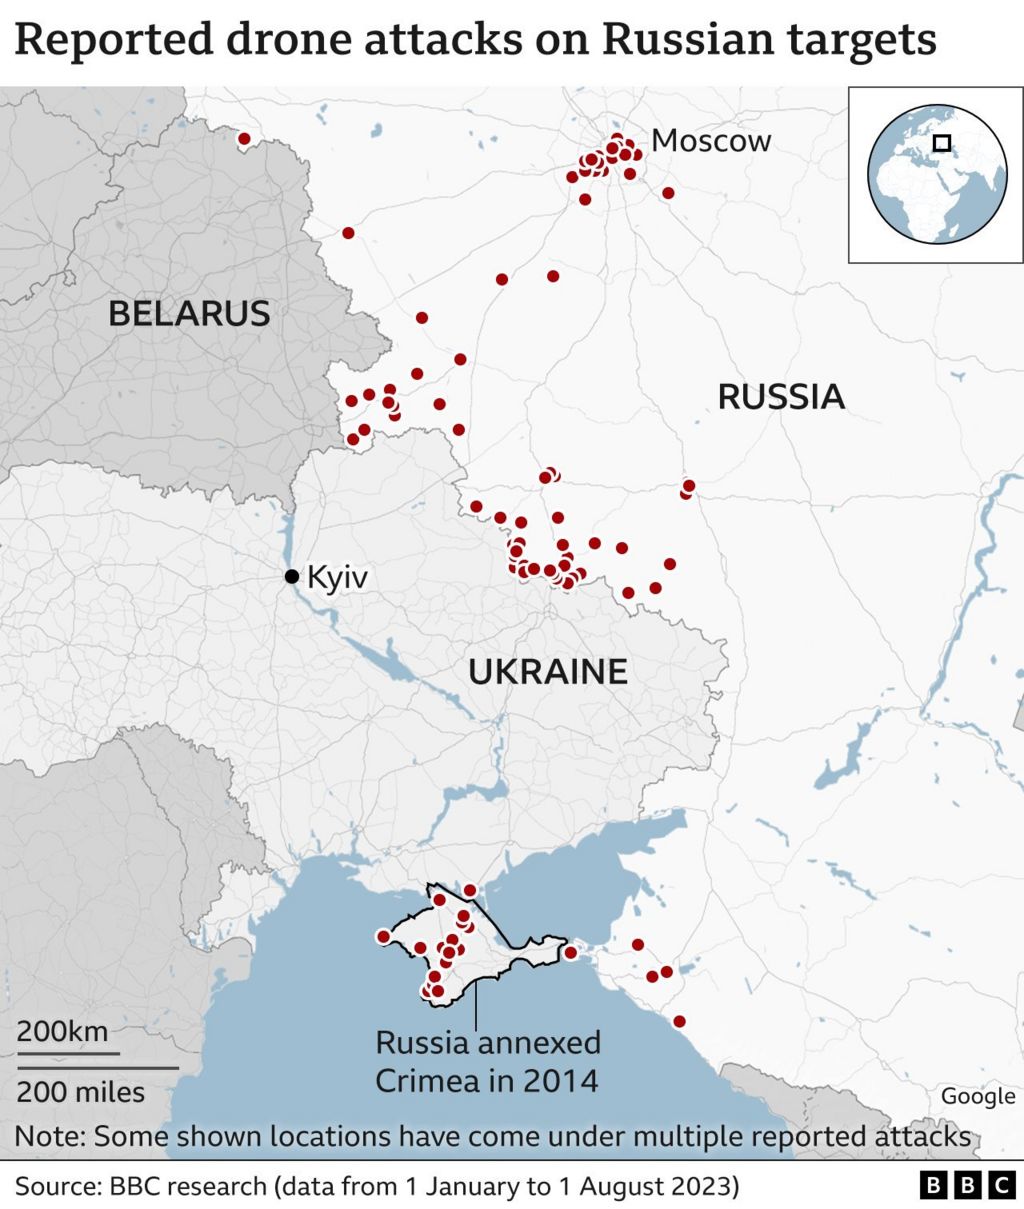 Map of Russia showing reported drone attacks, based on BBC research